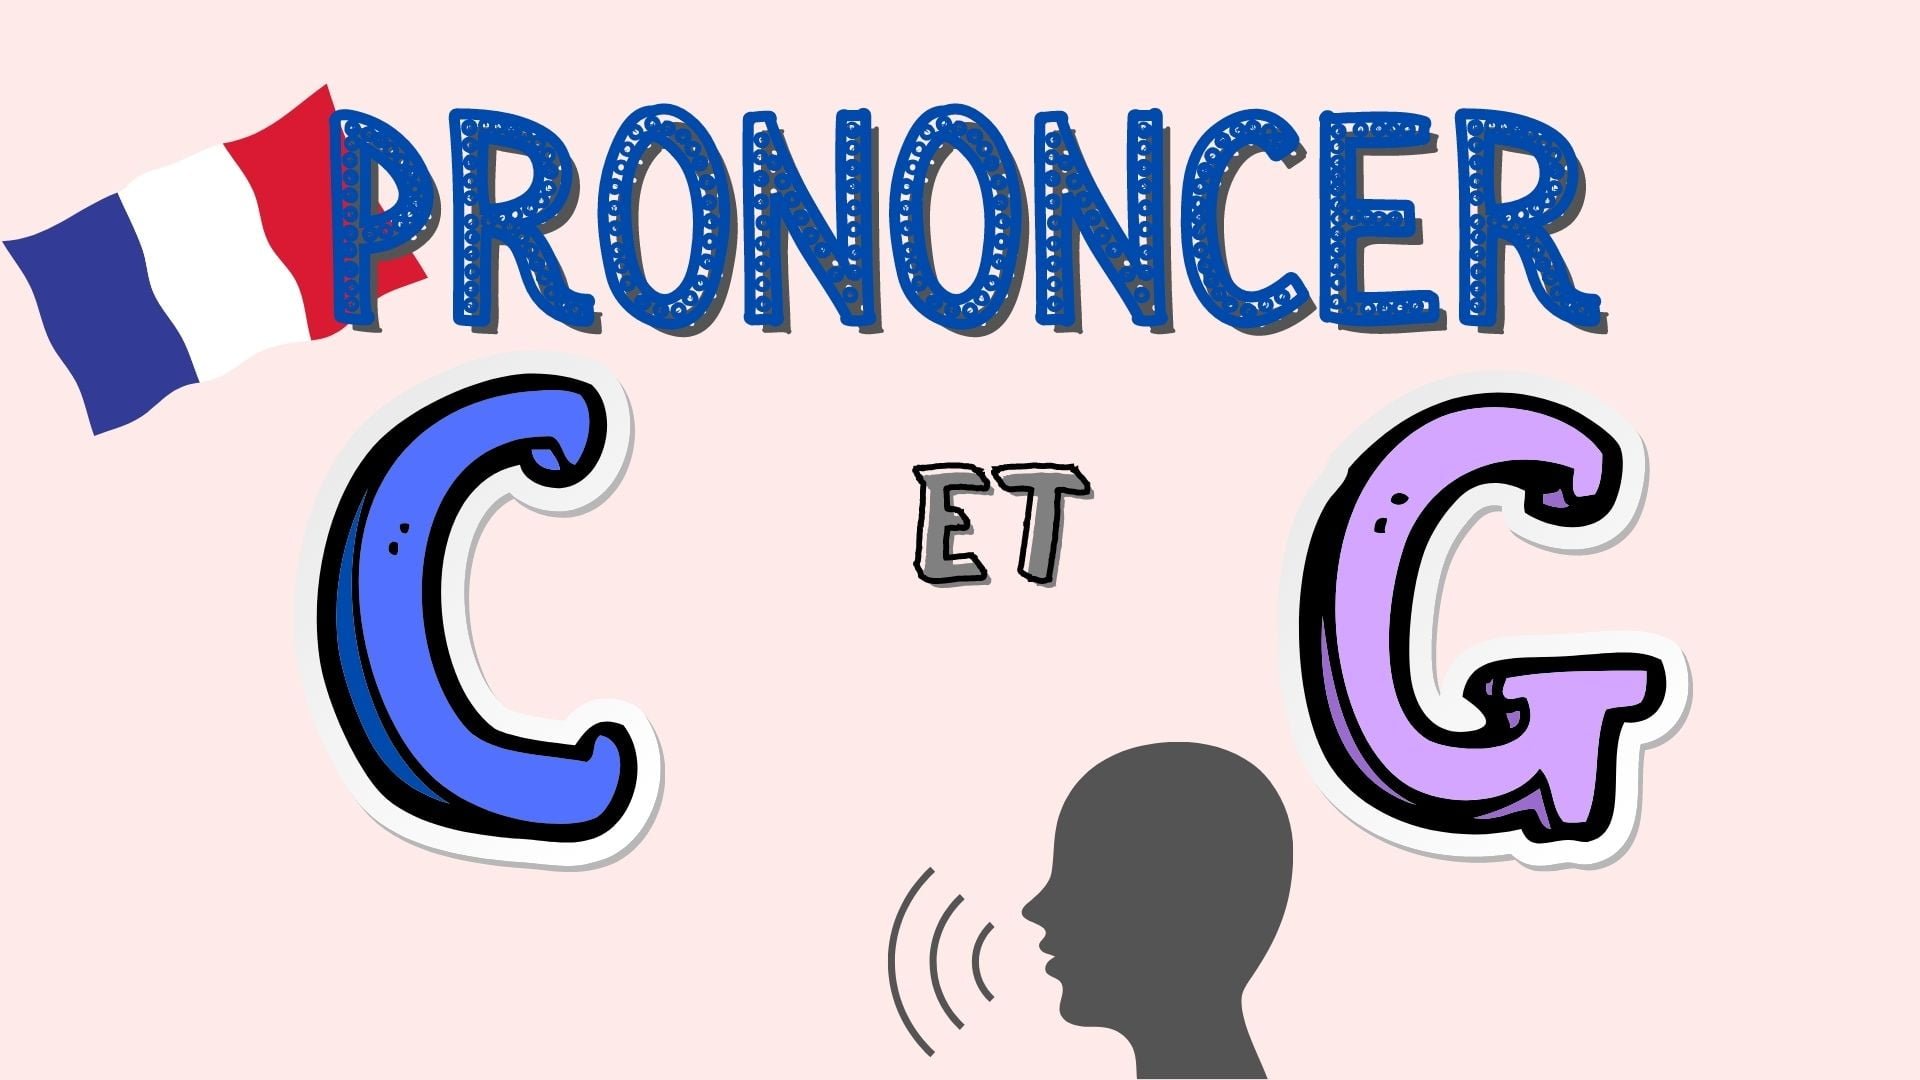 how to pronounce the letter c in french